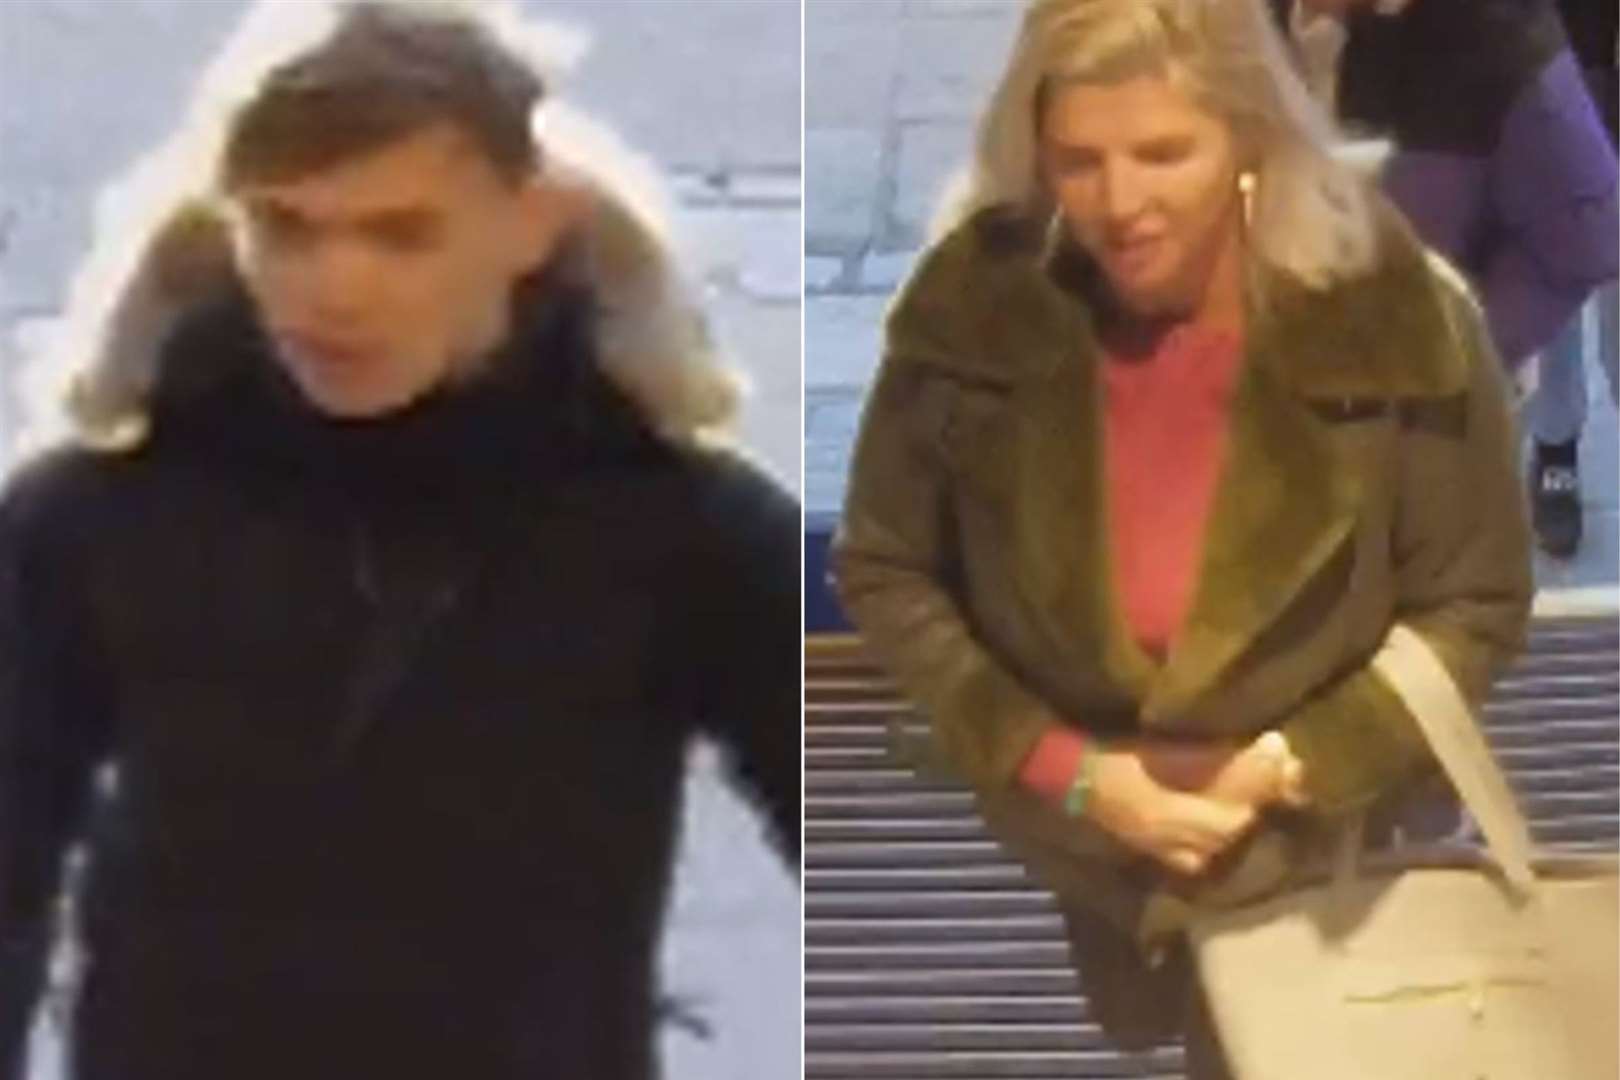 Police are looking to speak to two people following the theft of iPhone in Canterbury in December